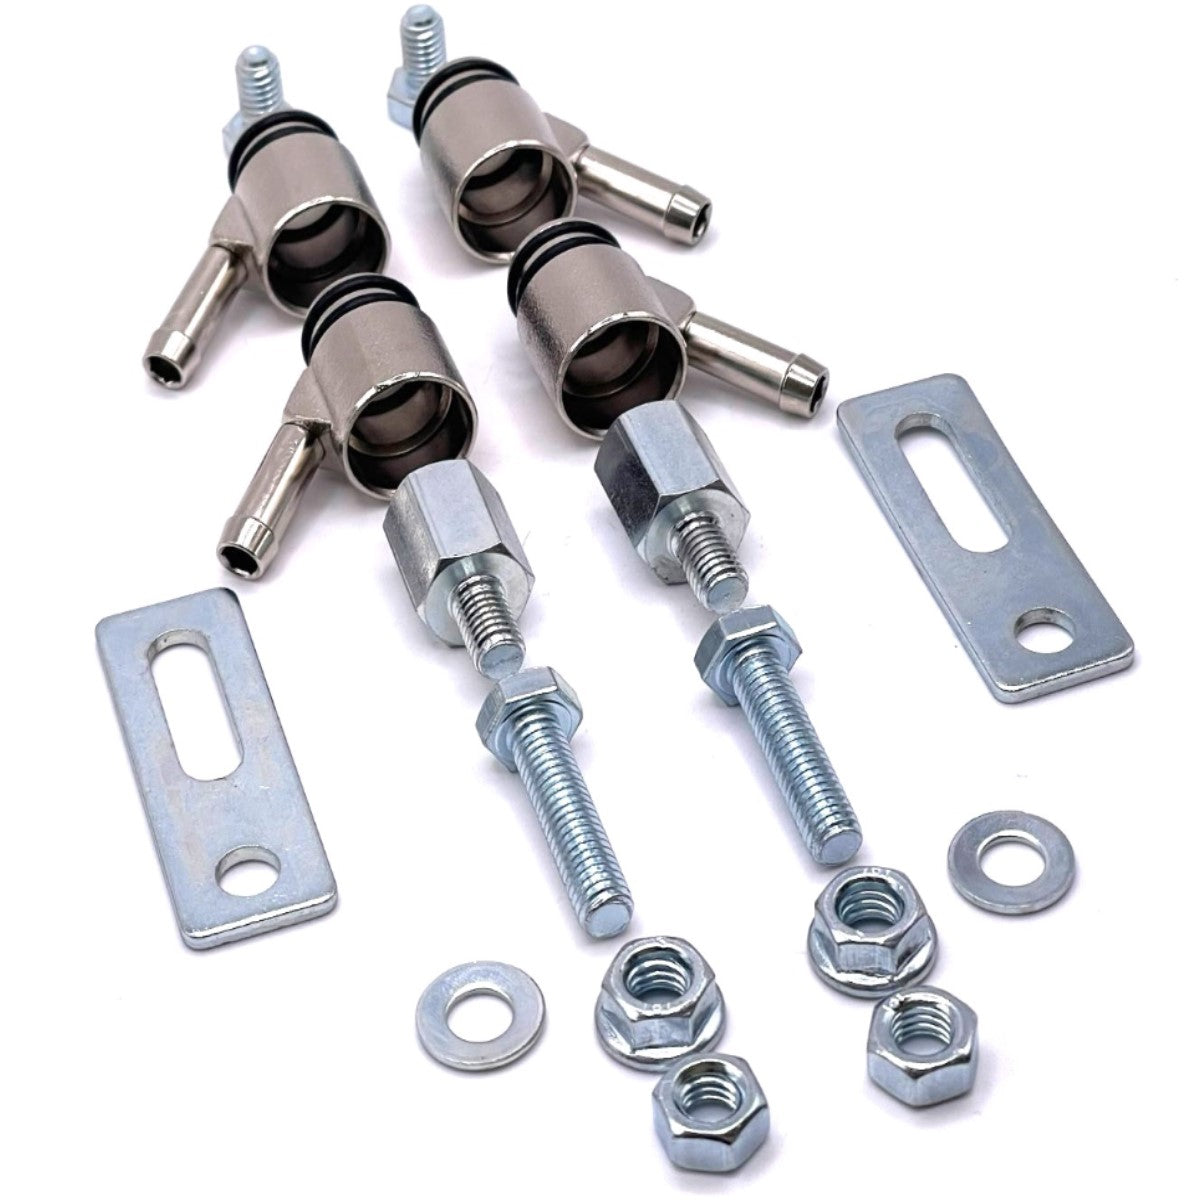 ‘QUICK FIT’ GAS FEED, 4CYL KIT, JAPAN INJECTOR – Ø14 / Ø6 – 2 ORINGS